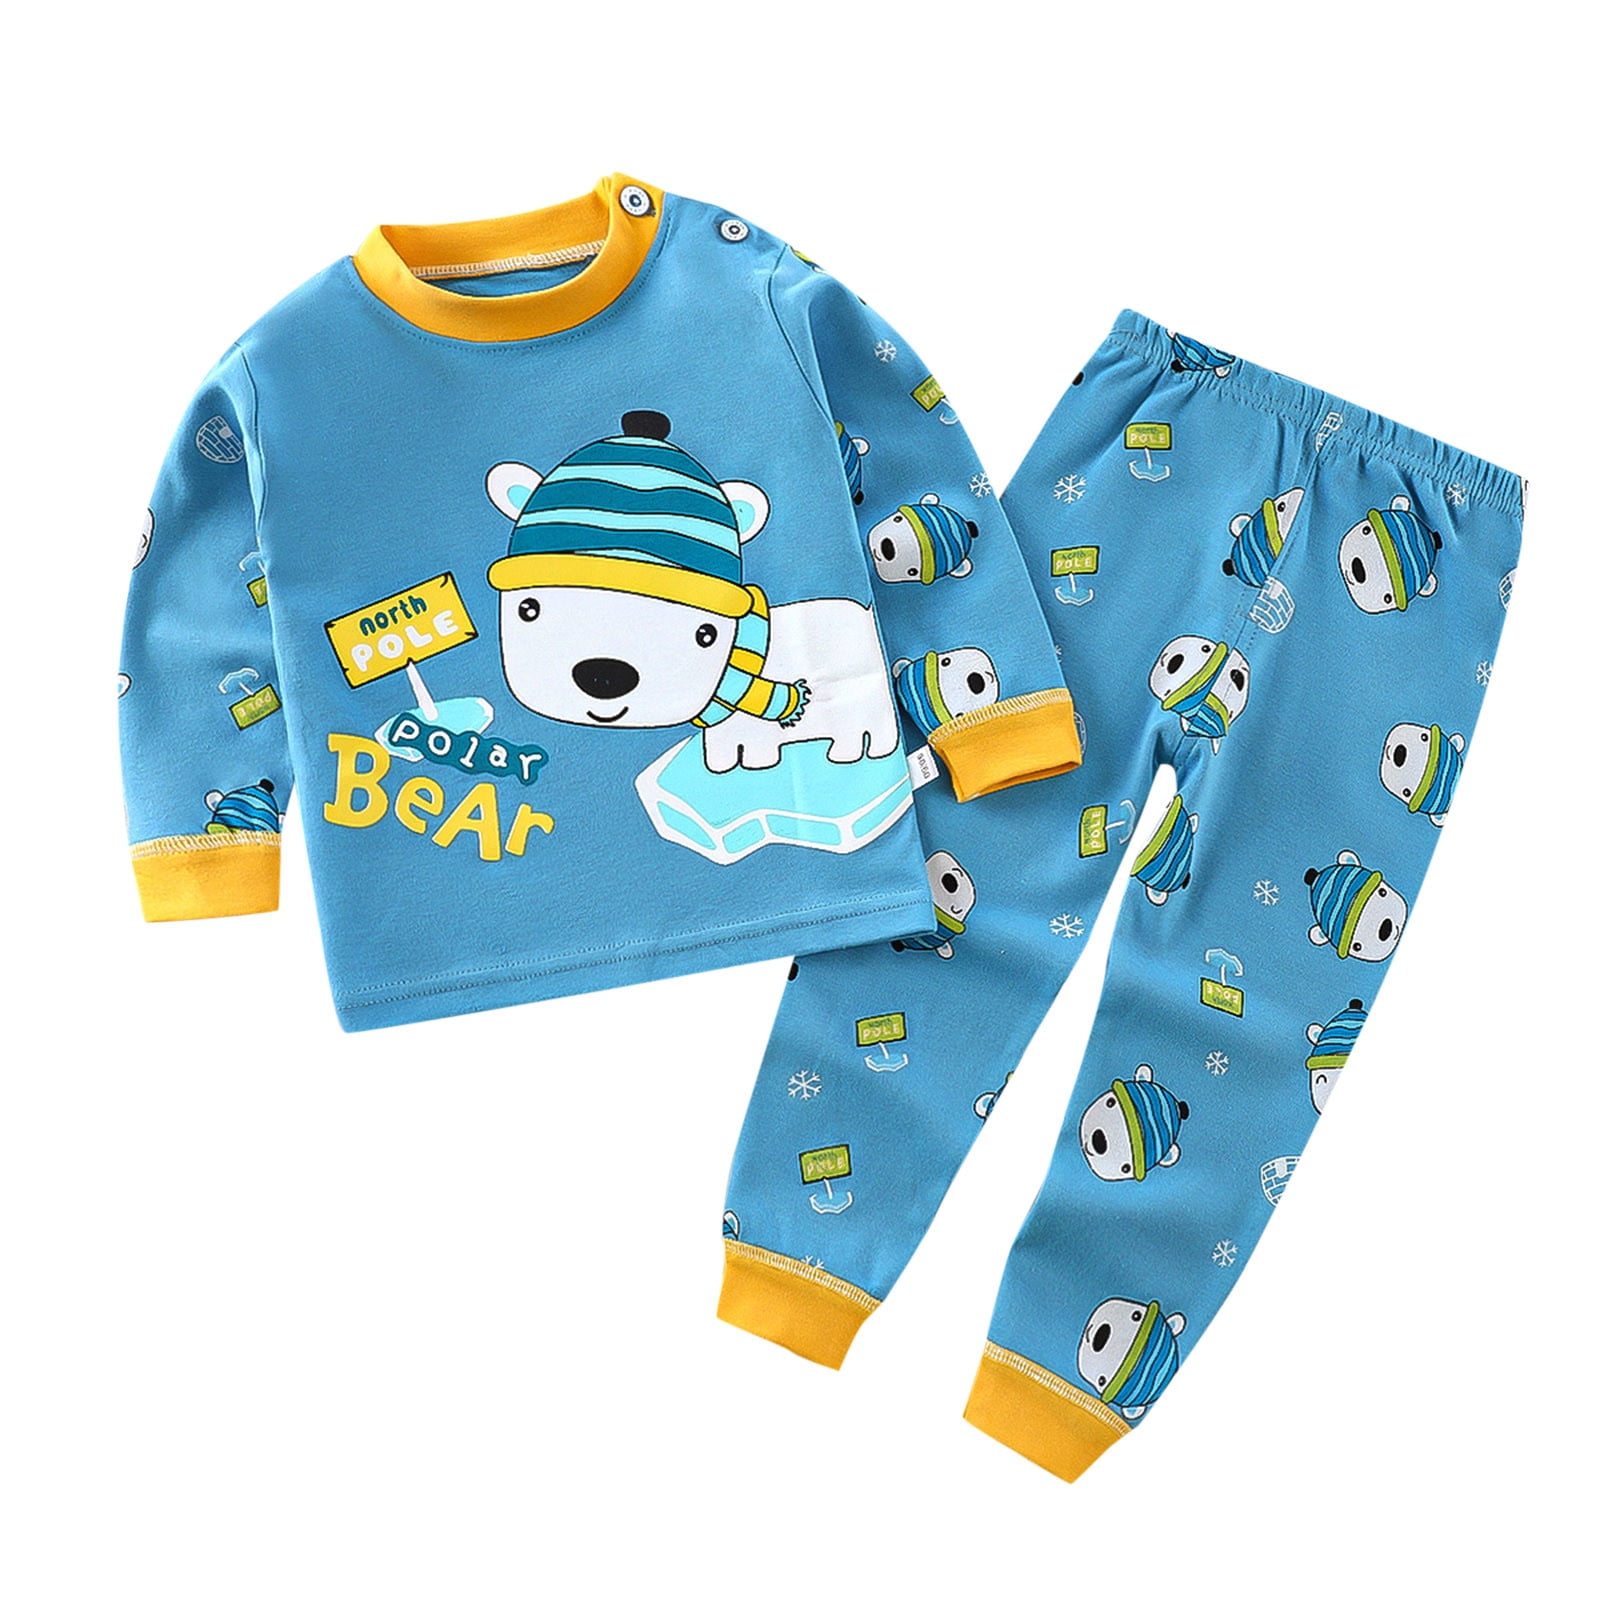 NKOOGH 3 Year Old Boy Clothes Foot Pajamas for Babies Toddler Kids